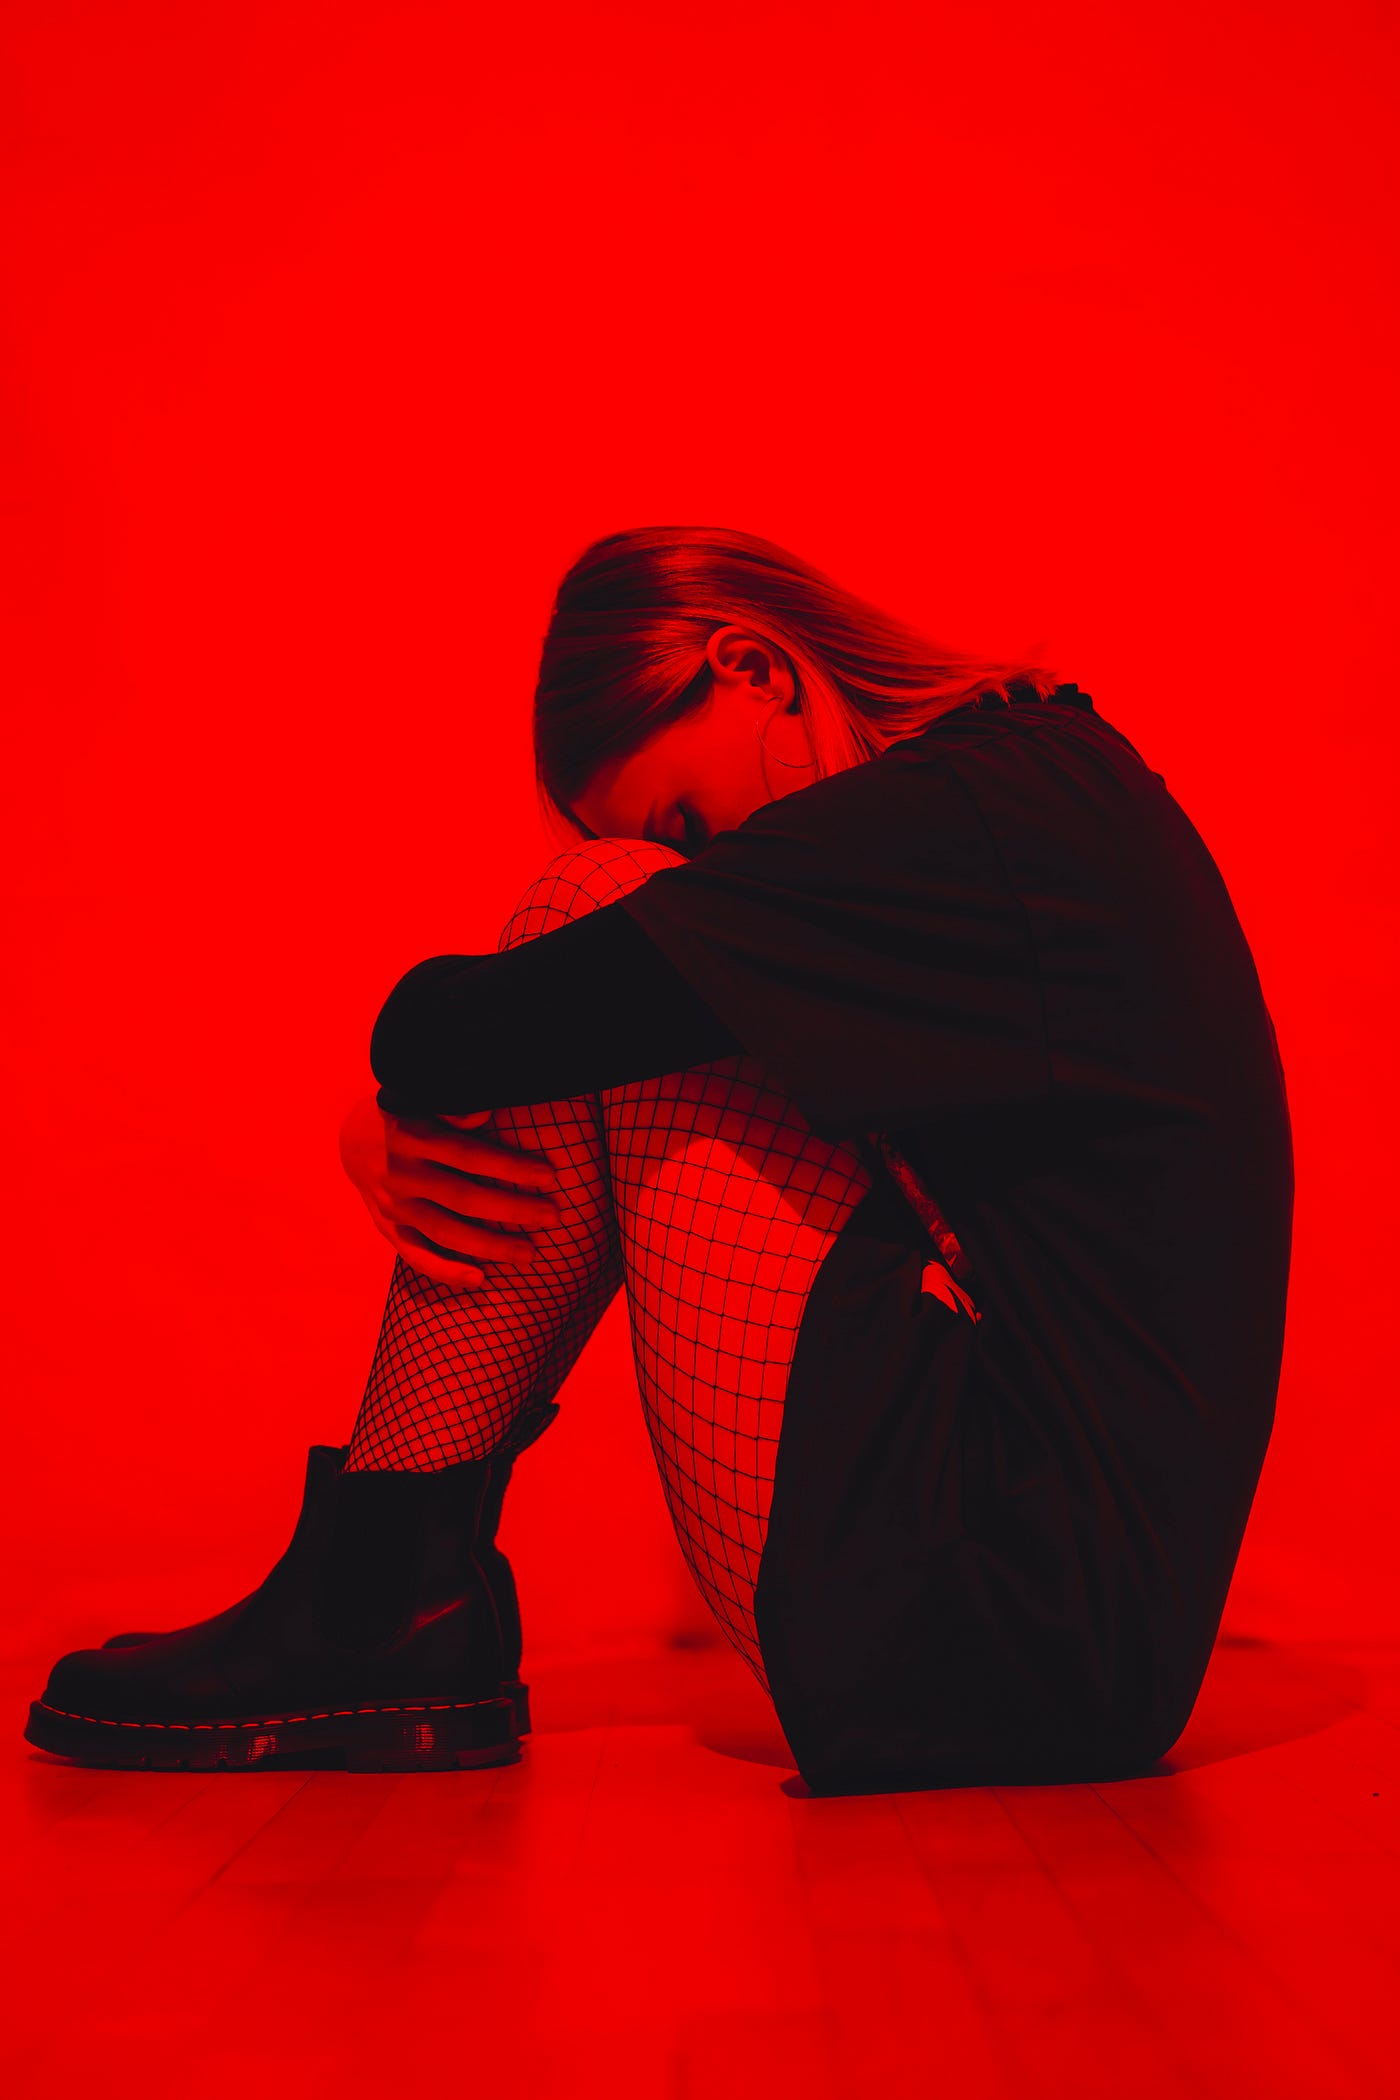 A depressed-appearing young woman sits, her head down while she embraces her bent lefts. Red background.